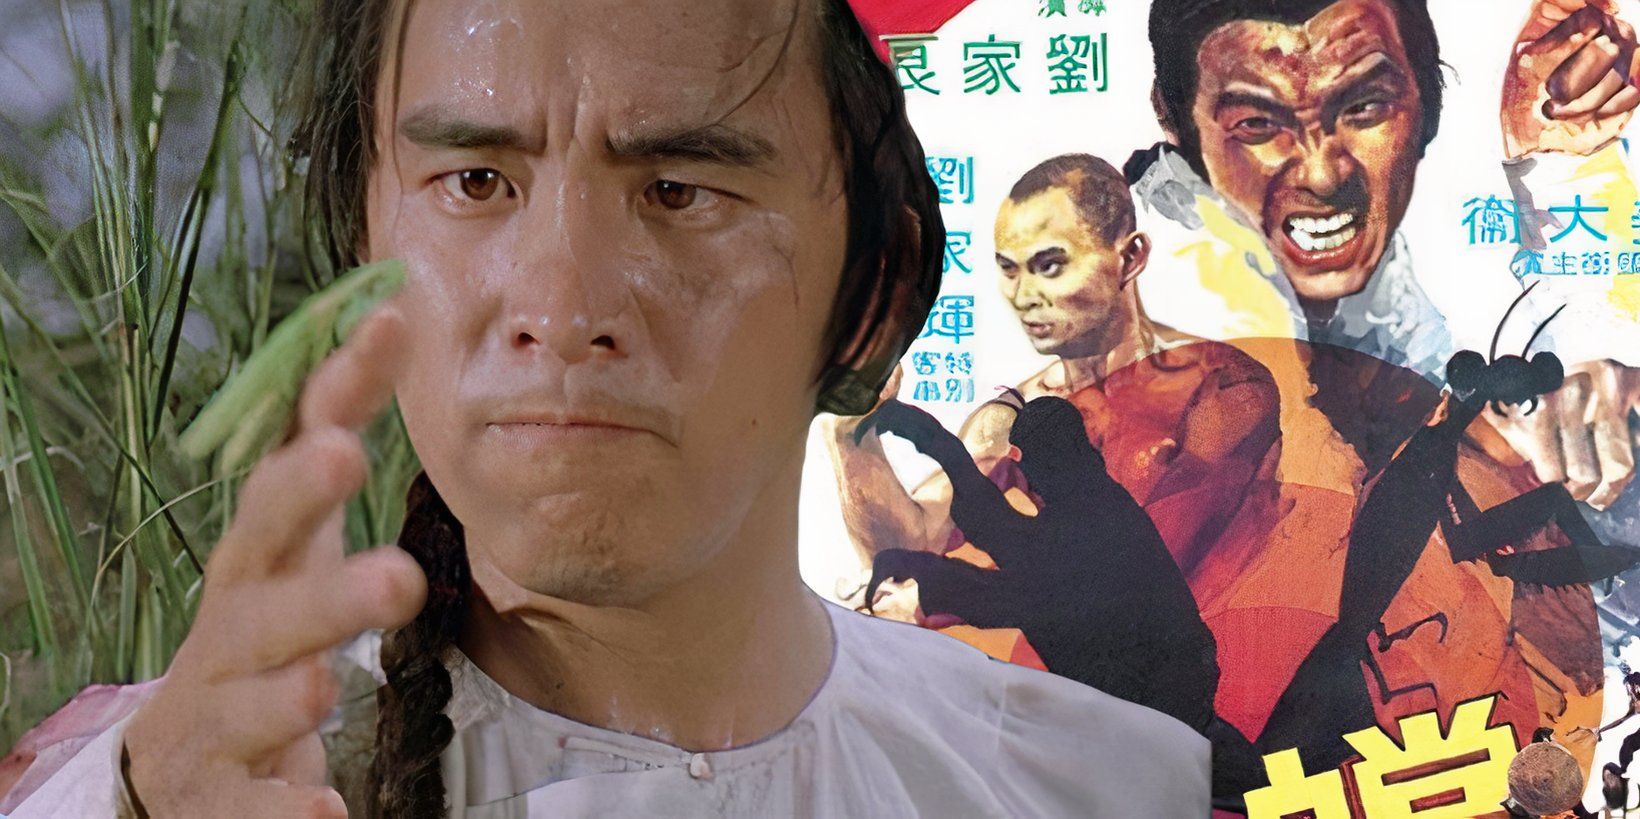 David Chiang as Wei Fung holding a praying mantis in his hand next to the poster for Shaolin Mantis